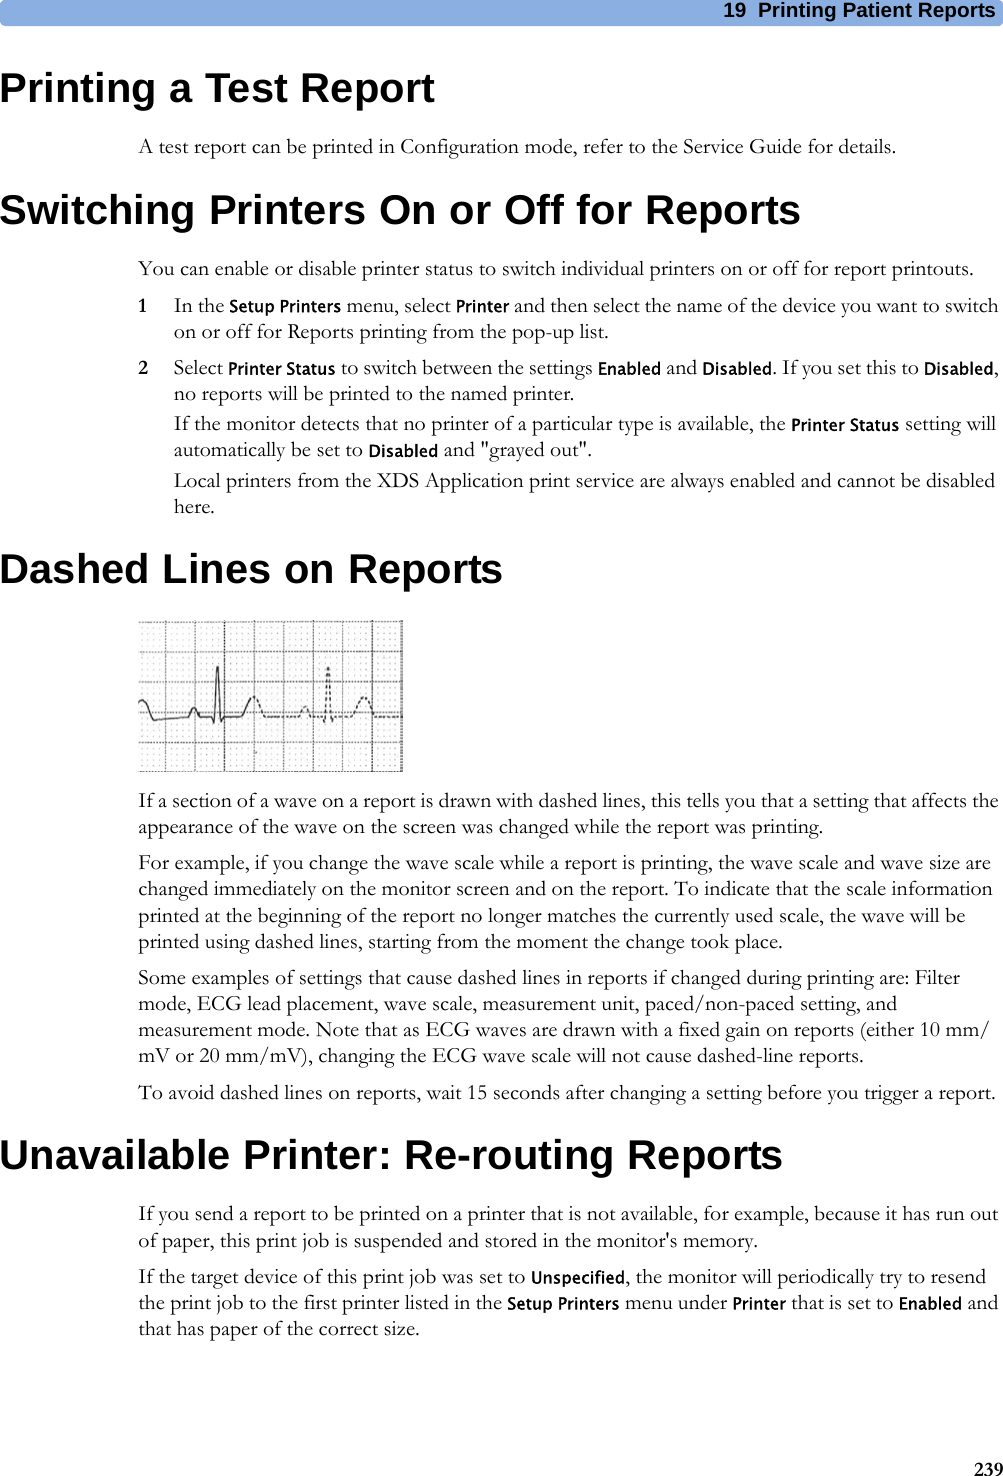 19 Printing Patient Reports239Printing a Test ReportA test report can be printed in Configuration mode, refer to the Service Guide for details.Switching Printers On or Off for ReportsYou can enable or disable printer status to switch individual printers on or off for report printouts.1In the Setup Printers menu, select Printer and then select the name of the device you want to switch on or off for Reports printing from the pop-up list.2Select Printer Status to switch between the settings Enabled and Disabled. If you set this to Disabled, no reports will be printed to the named printer.If the monitor detects that no printer of a particular type is available, the Printer Status setting will automatically be set to Disabled and &quot;grayed out&quot;.Local printers from the XDS Application print service are always enabled and cannot be disabled here.Dashed Lines on ReportsIf a section of a wave on a report is drawn with dashed lines, this tells you that a setting that affects the appearance of the wave on the screen was changed while the report was printing.For example, if you change the wave scale while a report is printing, the wave scale and wave size are changed immediately on the monitor screen and on the report. To indicate that the scale information printed at the beginning of the report no longer matches the currently used scale, the wave will be printed using dashed lines, starting from the moment the change took place.Some examples of settings that cause dashed lines in reports if changed during printing are: Filter mode, ECG lead placement, wave scale, measurement unit, paced/non-paced setting, and measurement mode. Note that as ECG waves are drawn with a fixed gain on reports (either 10 mm/mV or 20 mm/mV), changing the ECG wave scale will not cause dashed-line reports.To avoid dashed lines on reports, wait 15 seconds after changing a setting before you trigger a report.Unavailable Printer: Re-routing ReportsIf you send a report to be printed on a printer that is not available, for example, because it has run out of paper, this print job is suspended and stored in the monitor&apos;s memory.If the target device of this print job was set to Unspecified, the monitor will periodically try to resend the print job to the first printer listed in the Setup Printers menu under Printer that is set to Enabled and that has paper of the correct size.